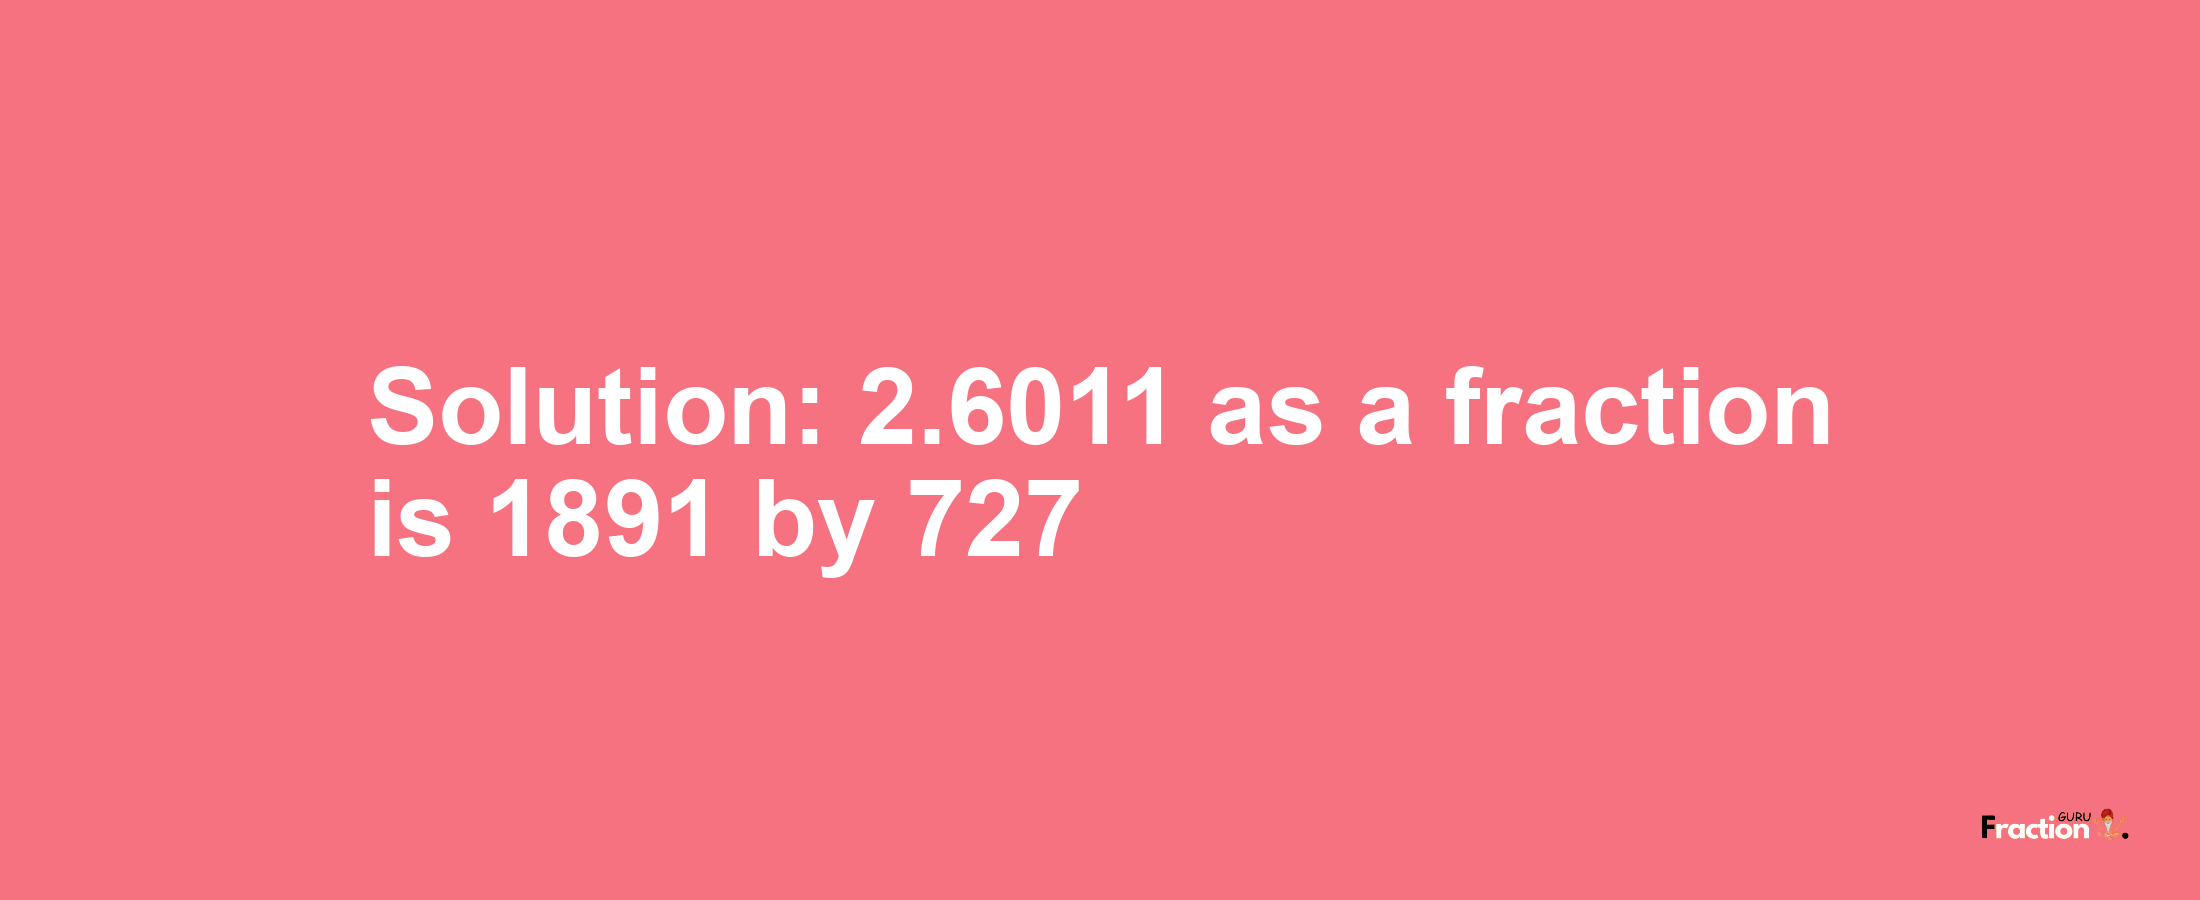 Solution:2.6011 as a fraction is 1891/727